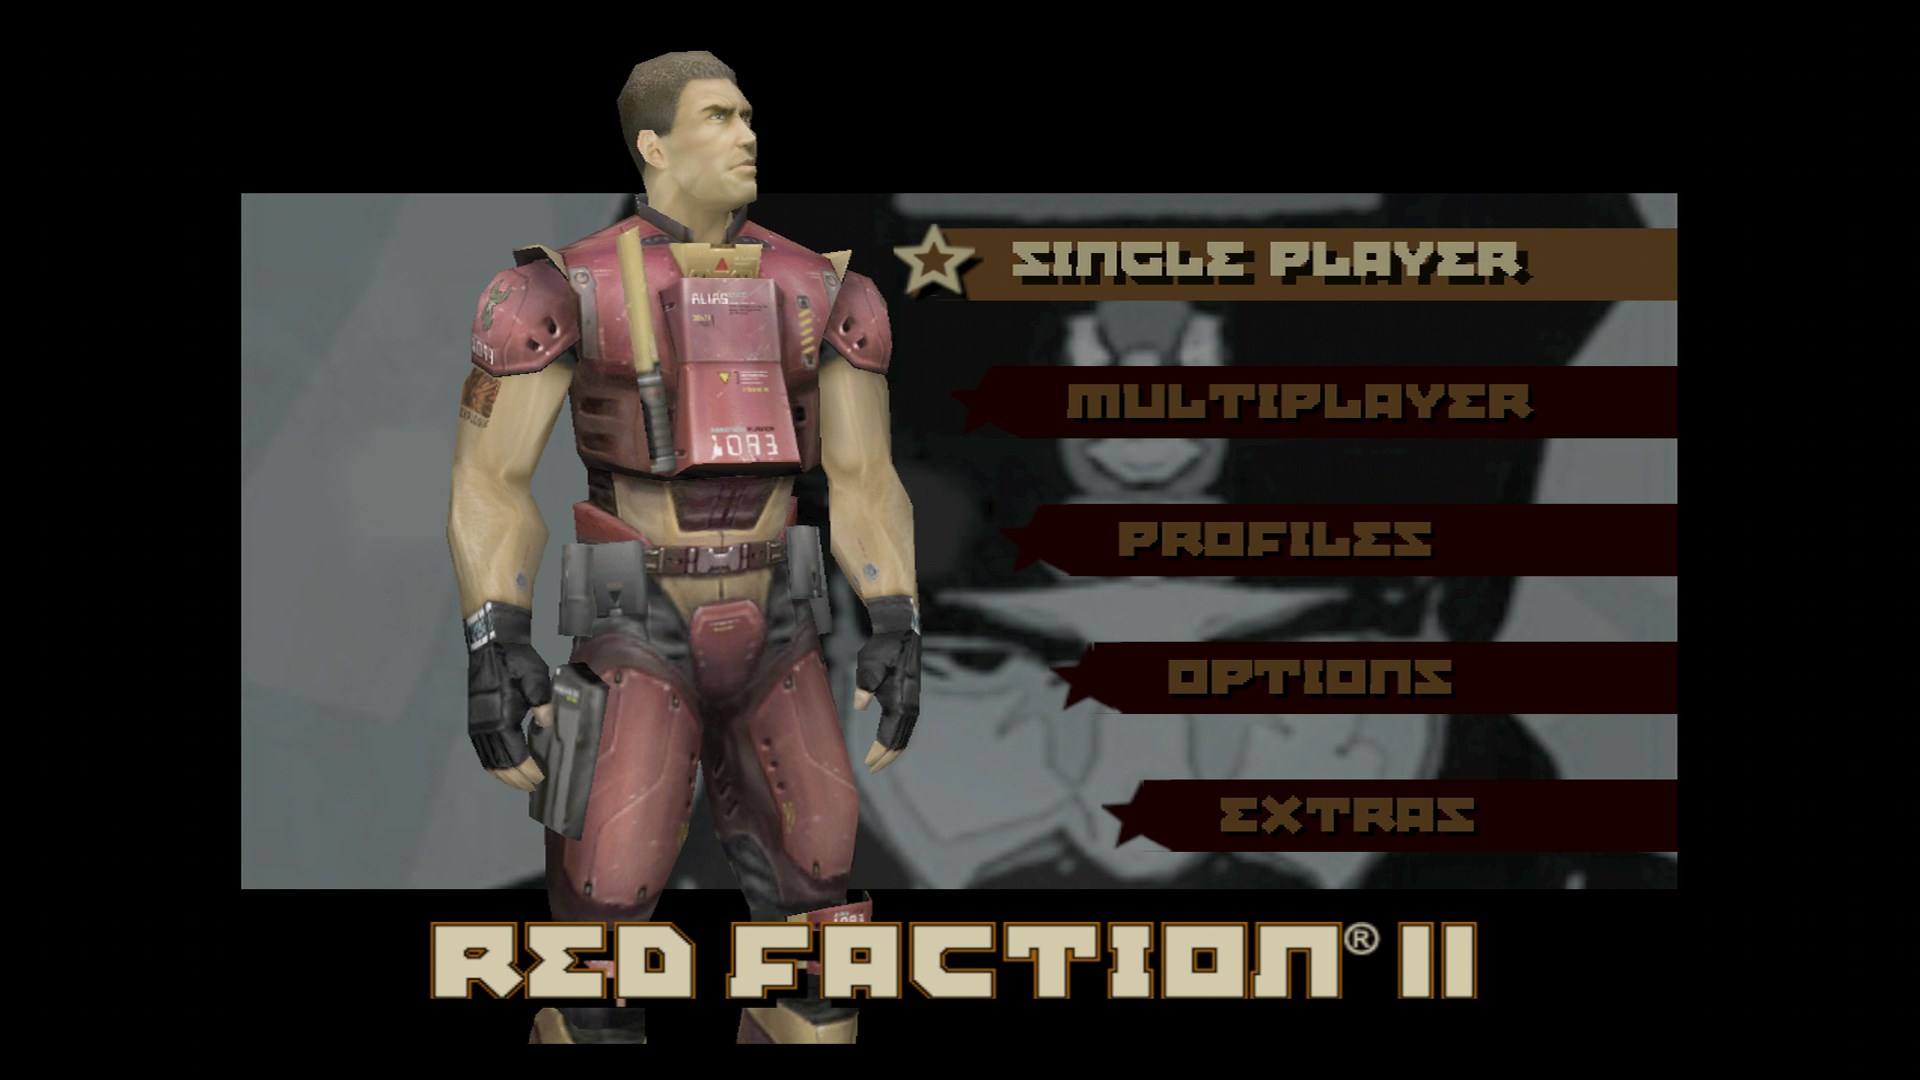 xbox red faction 2